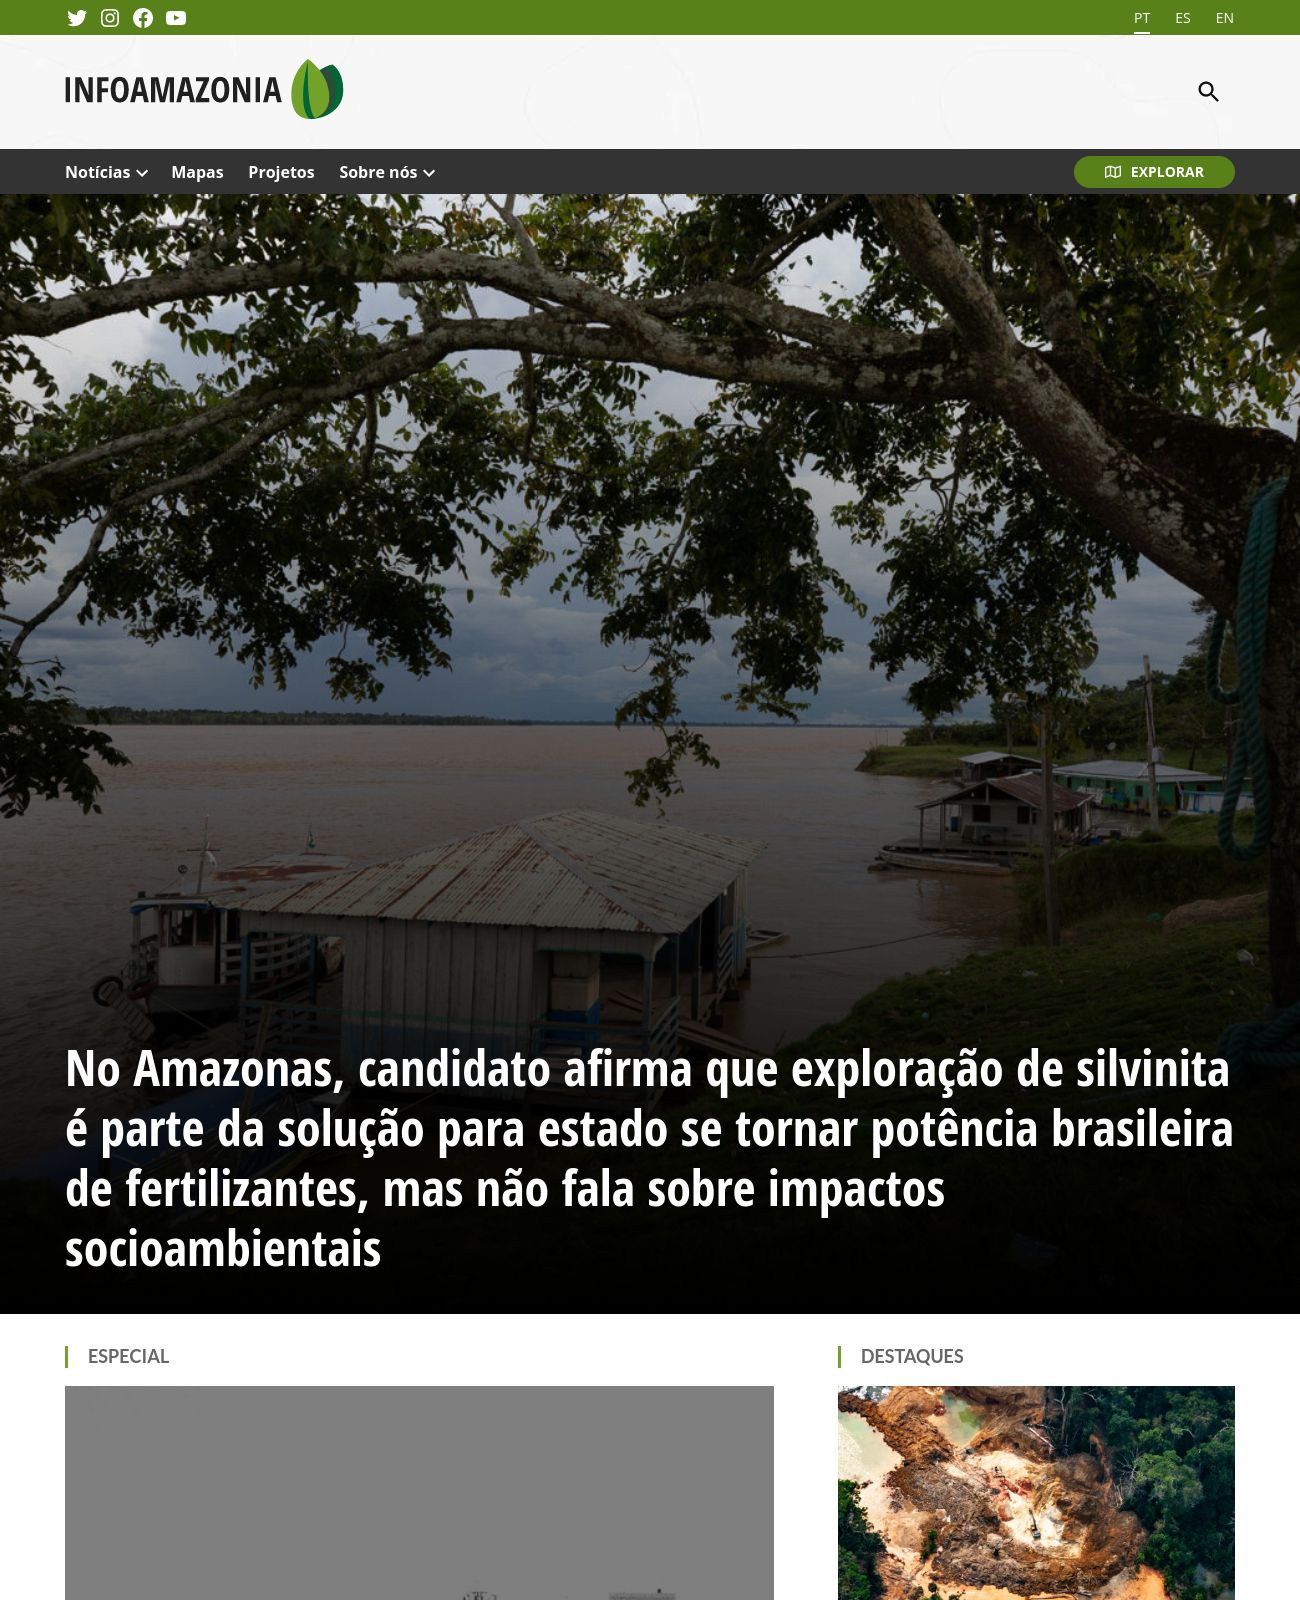 InfoAmazonia at 2022-09-19 09:01:34-03:00 local time